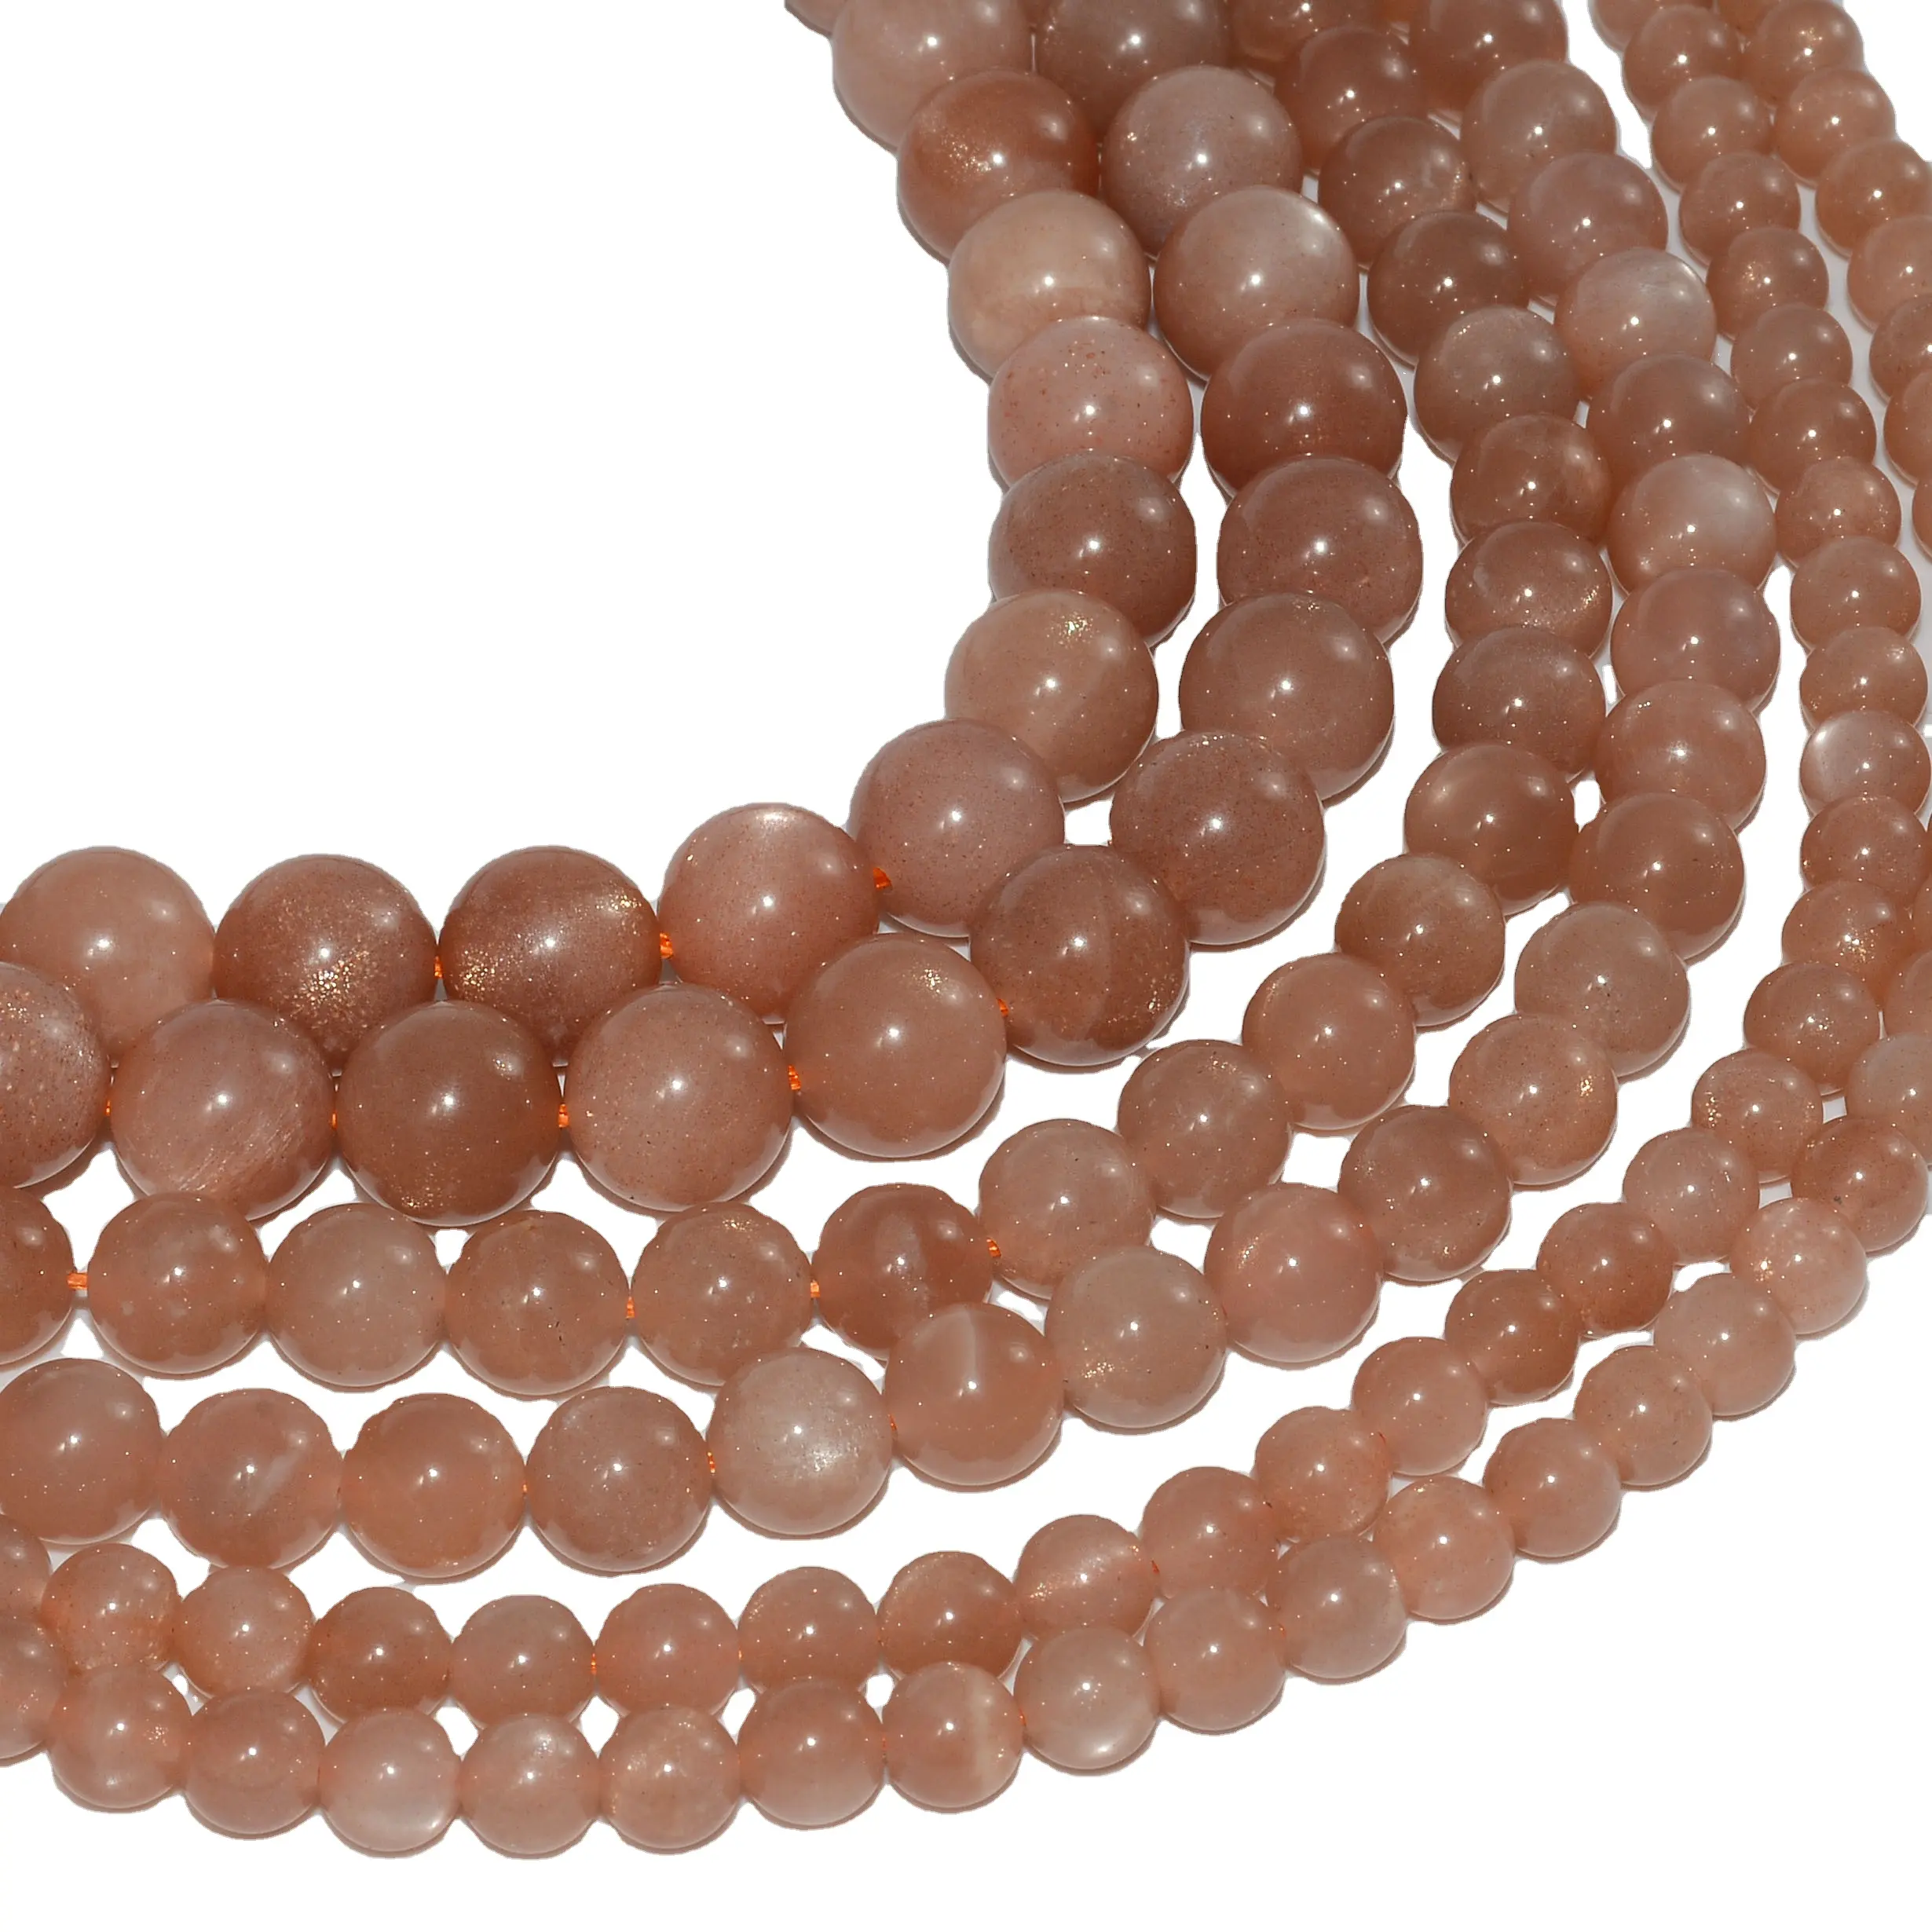 6mm~12mm High Quality Natural Faceted Peach Moonstone sun stone Round Loose Beads DIY Jewelry making supplies 10 strands per lot